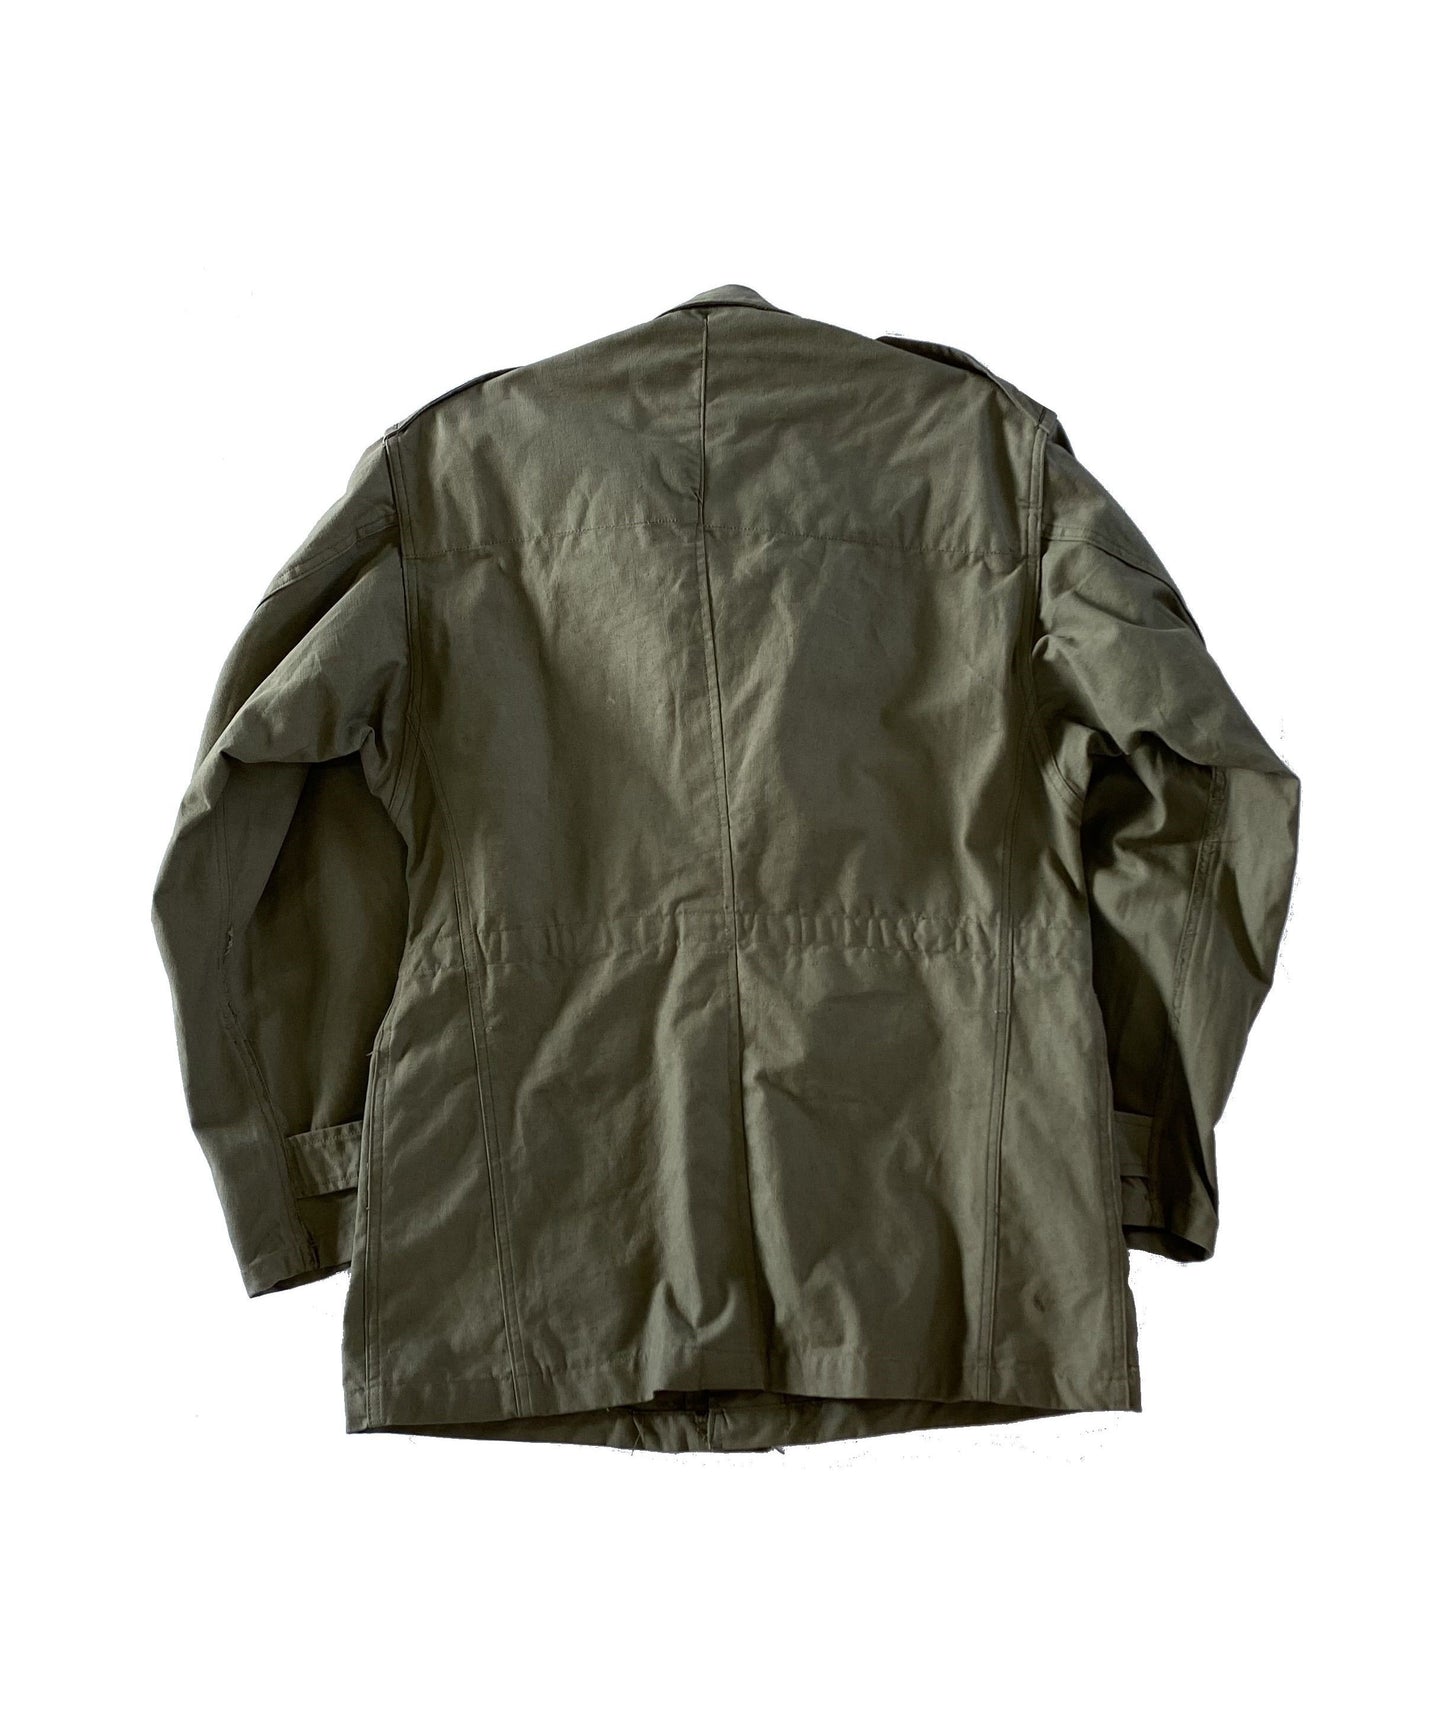 1940's-1950's pique hunting jacket